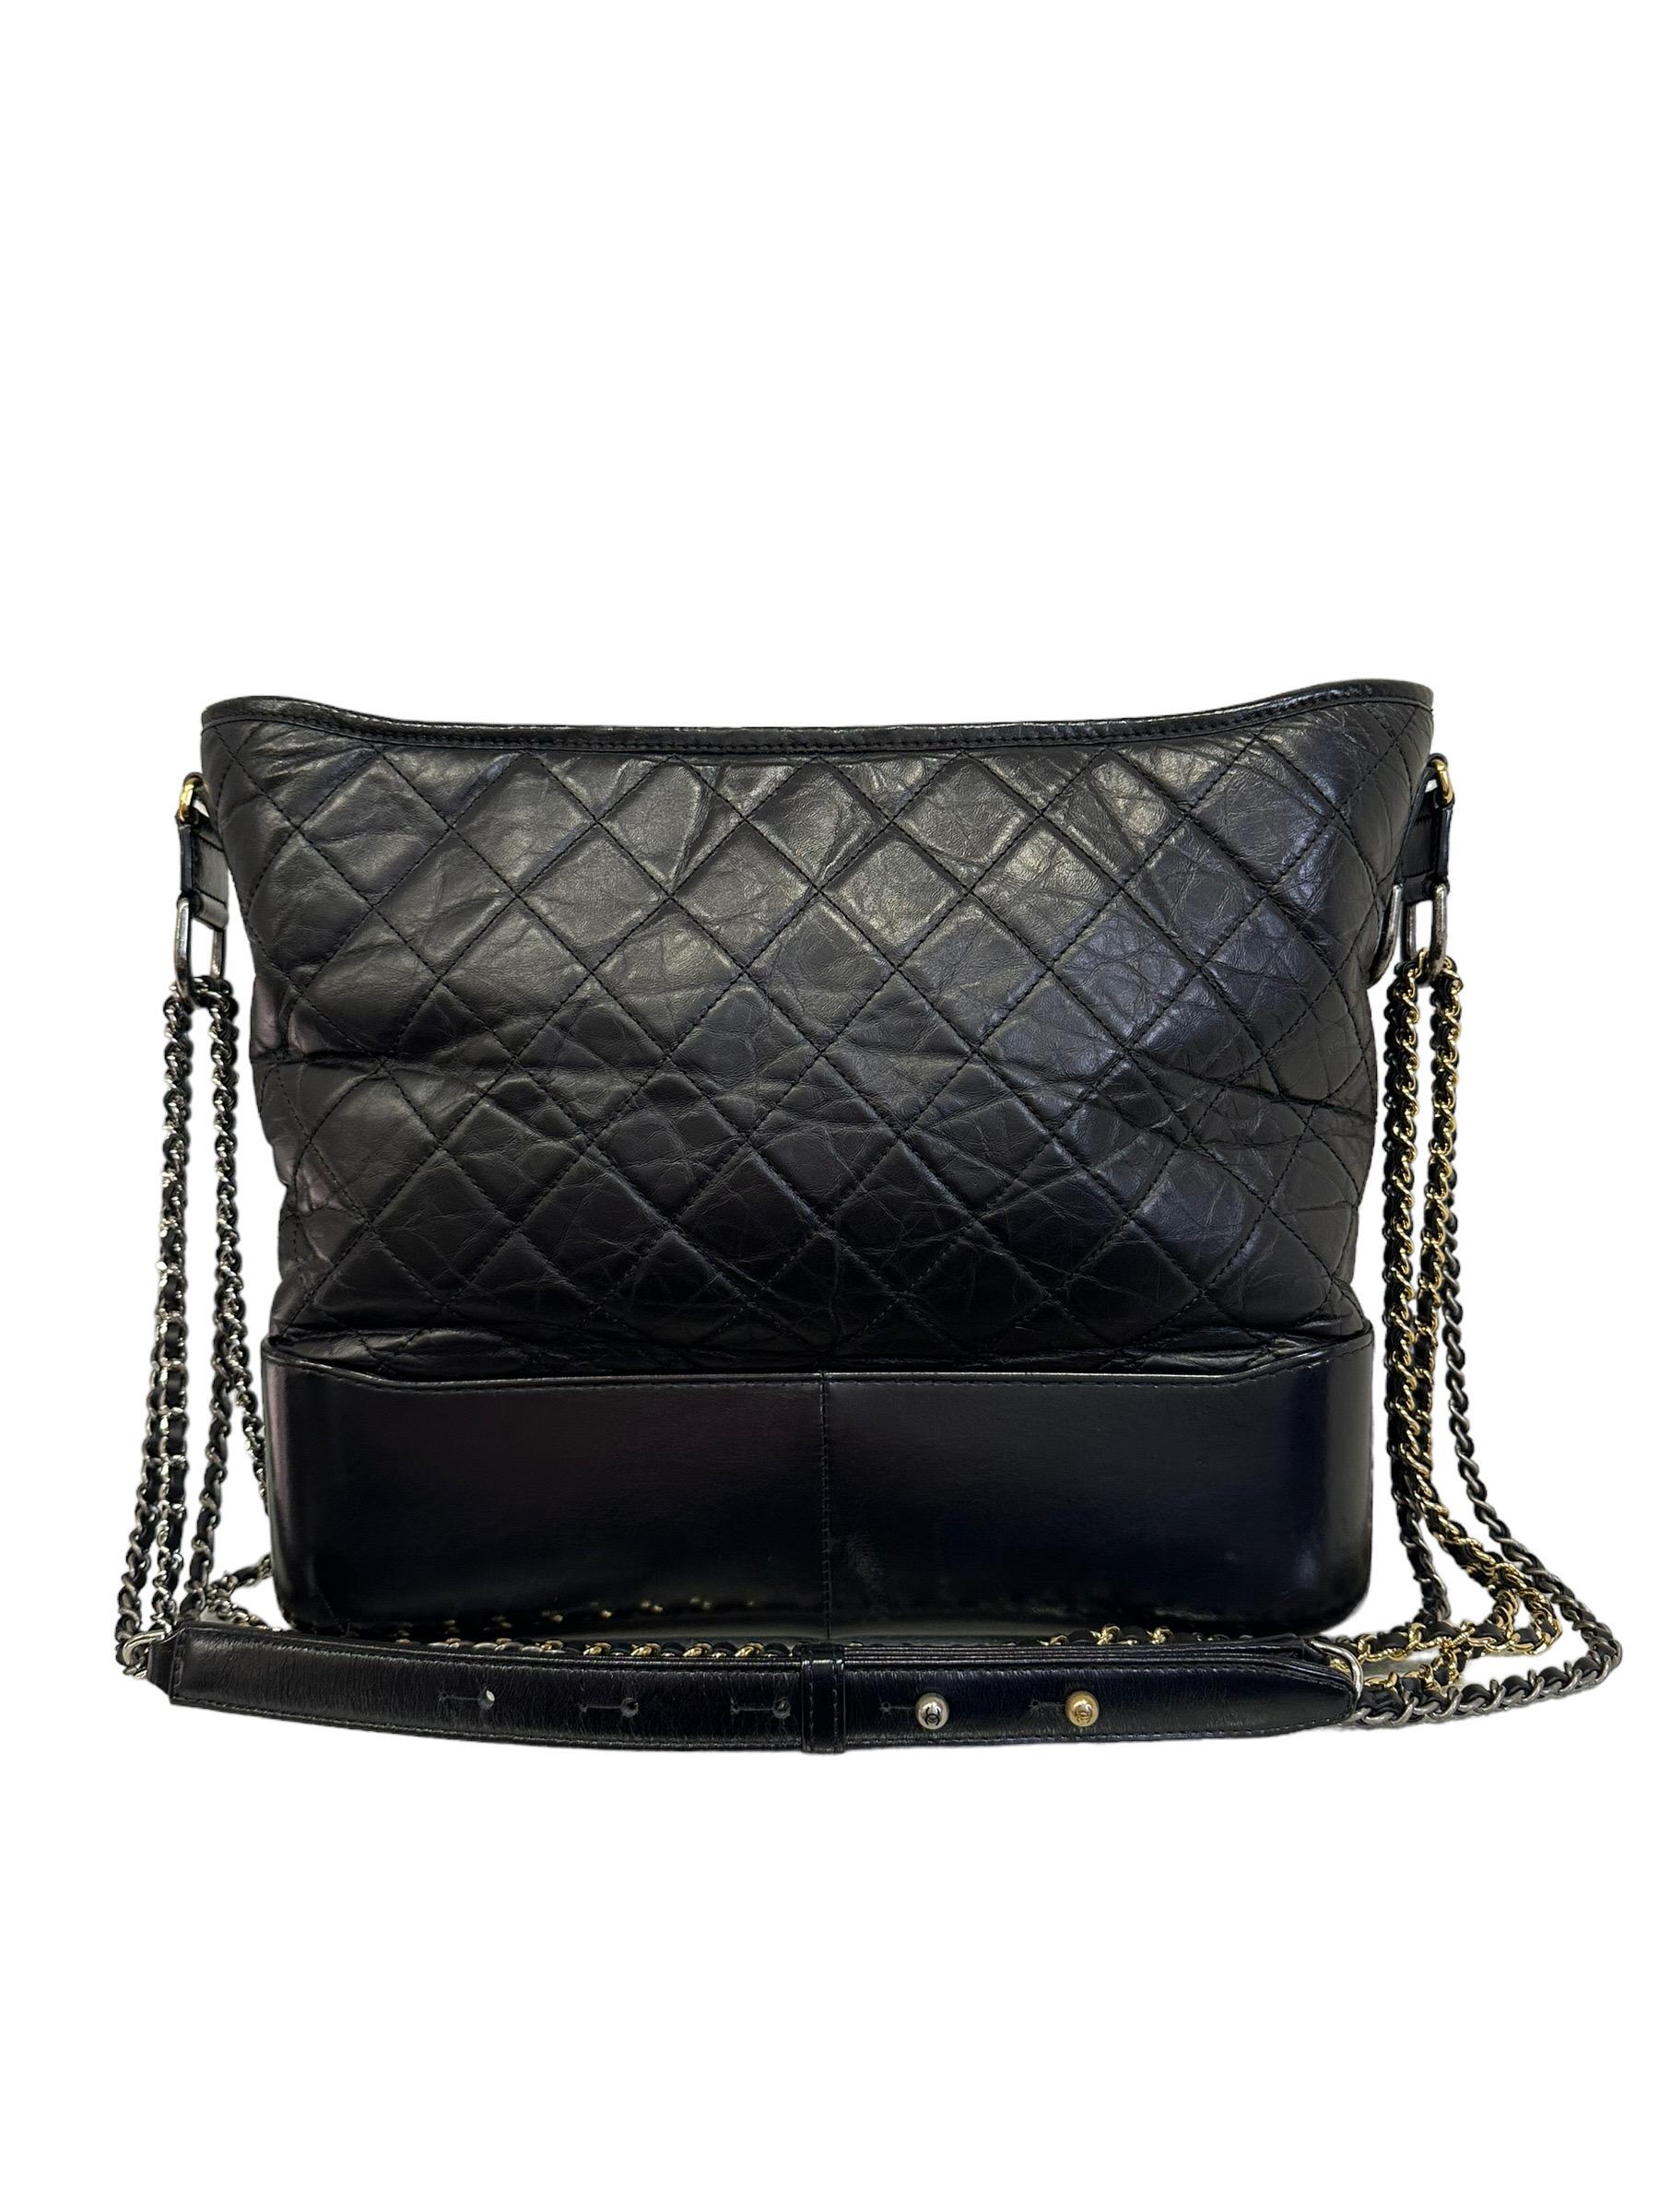 2018 Chanel Gabrielle Maxi Black Leather Top Shoulder Bag In Good Condition For Sale In Torre Del Greco, IT